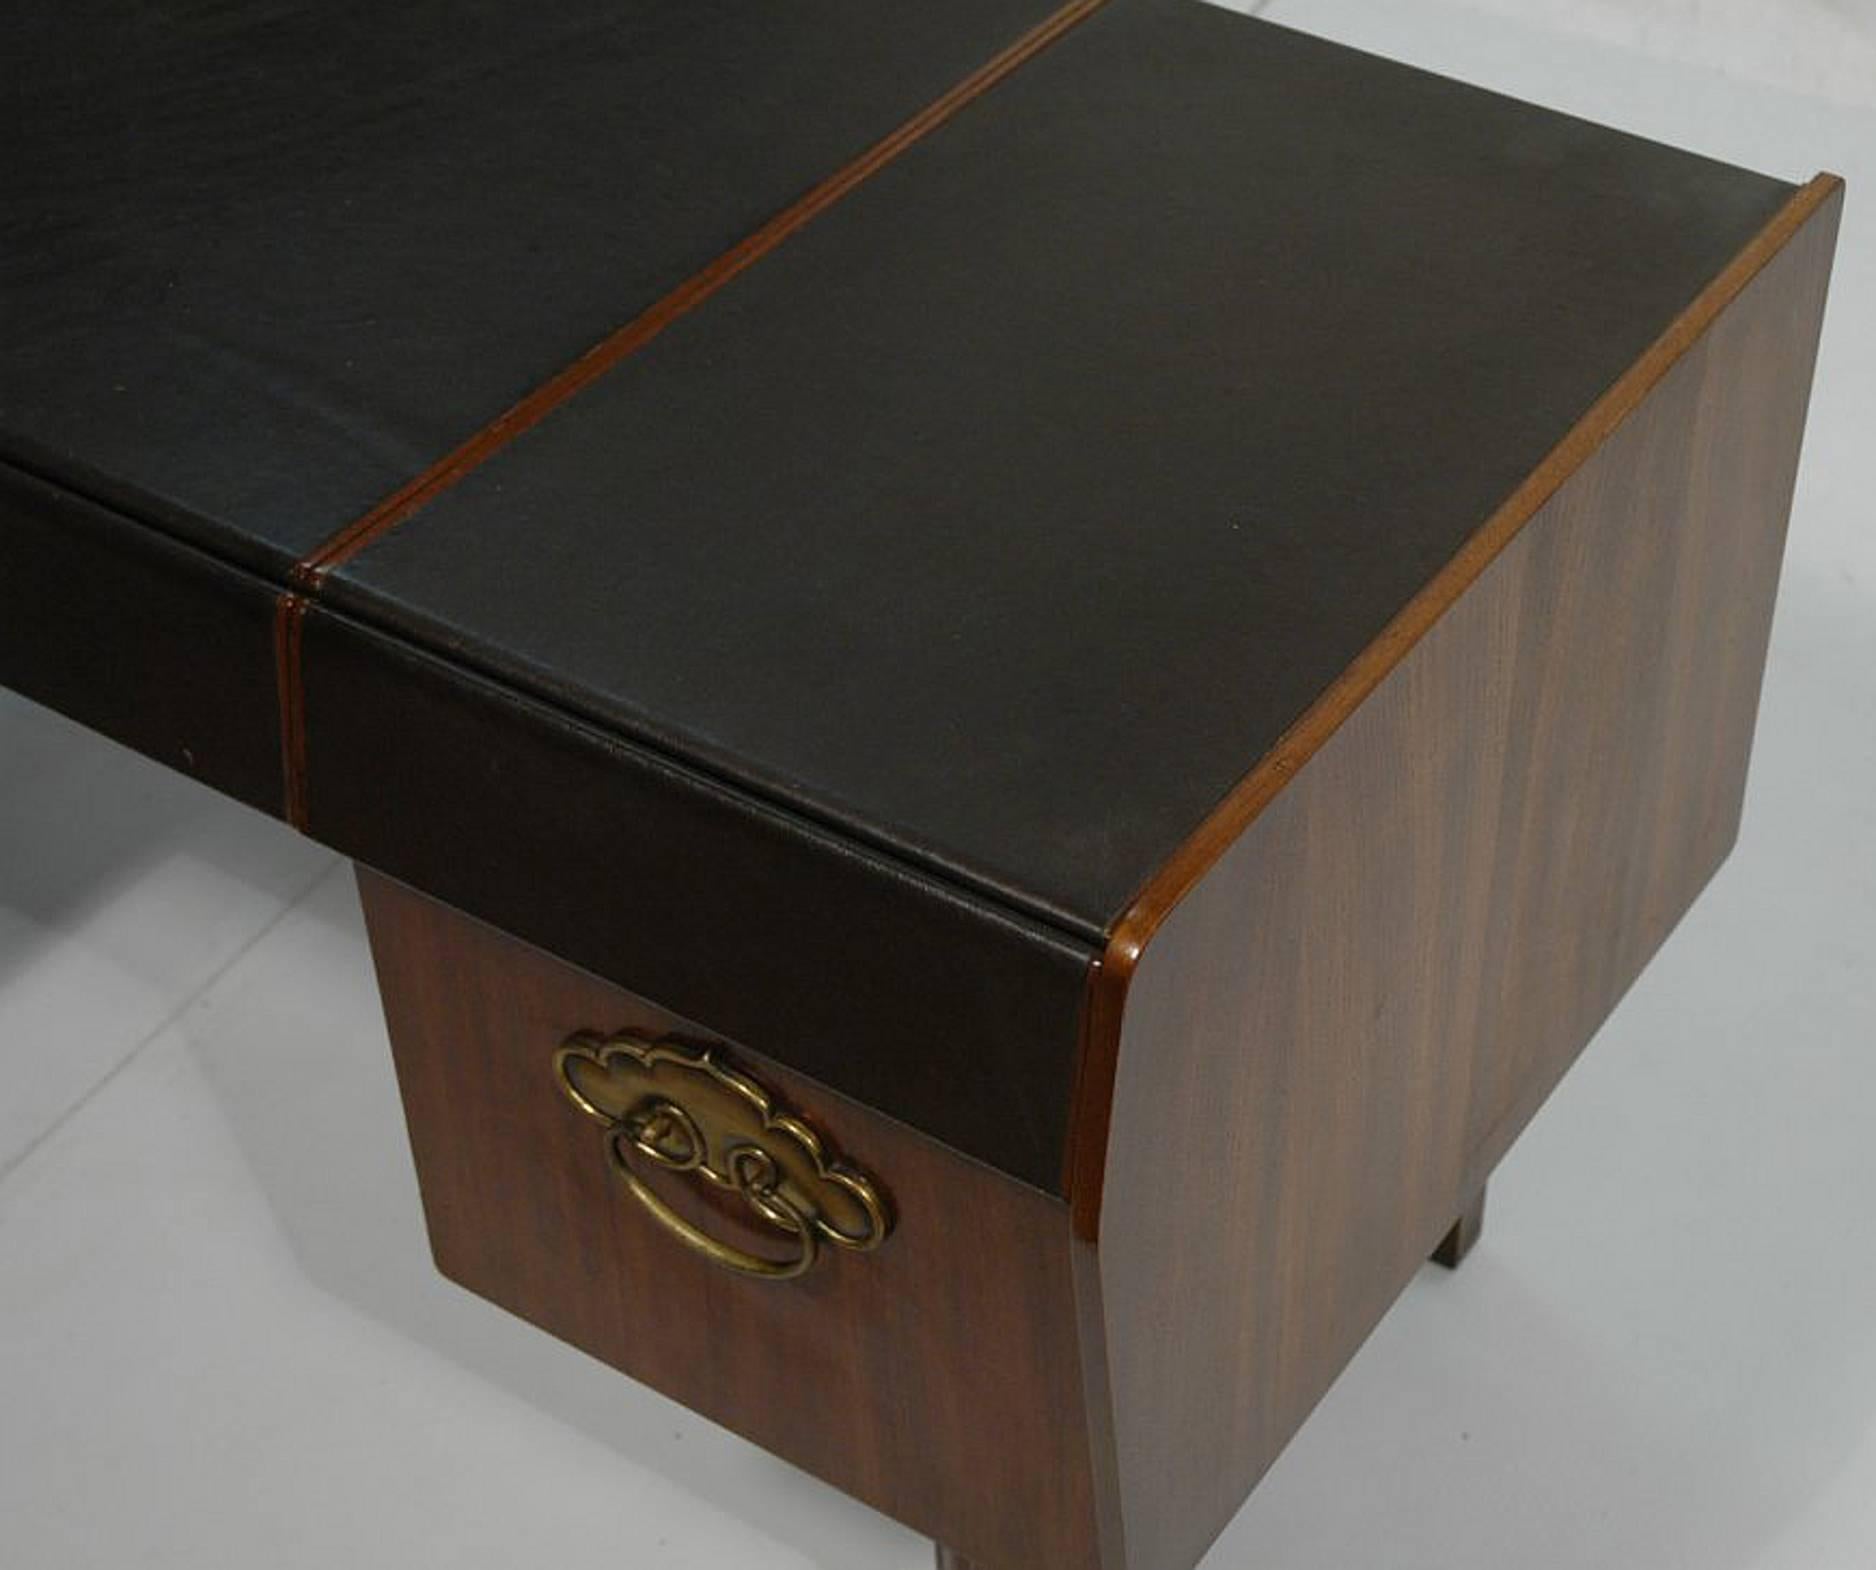 Patinated Leather Top, Walnut and Bronze Desk by Bert England for Widdicomb